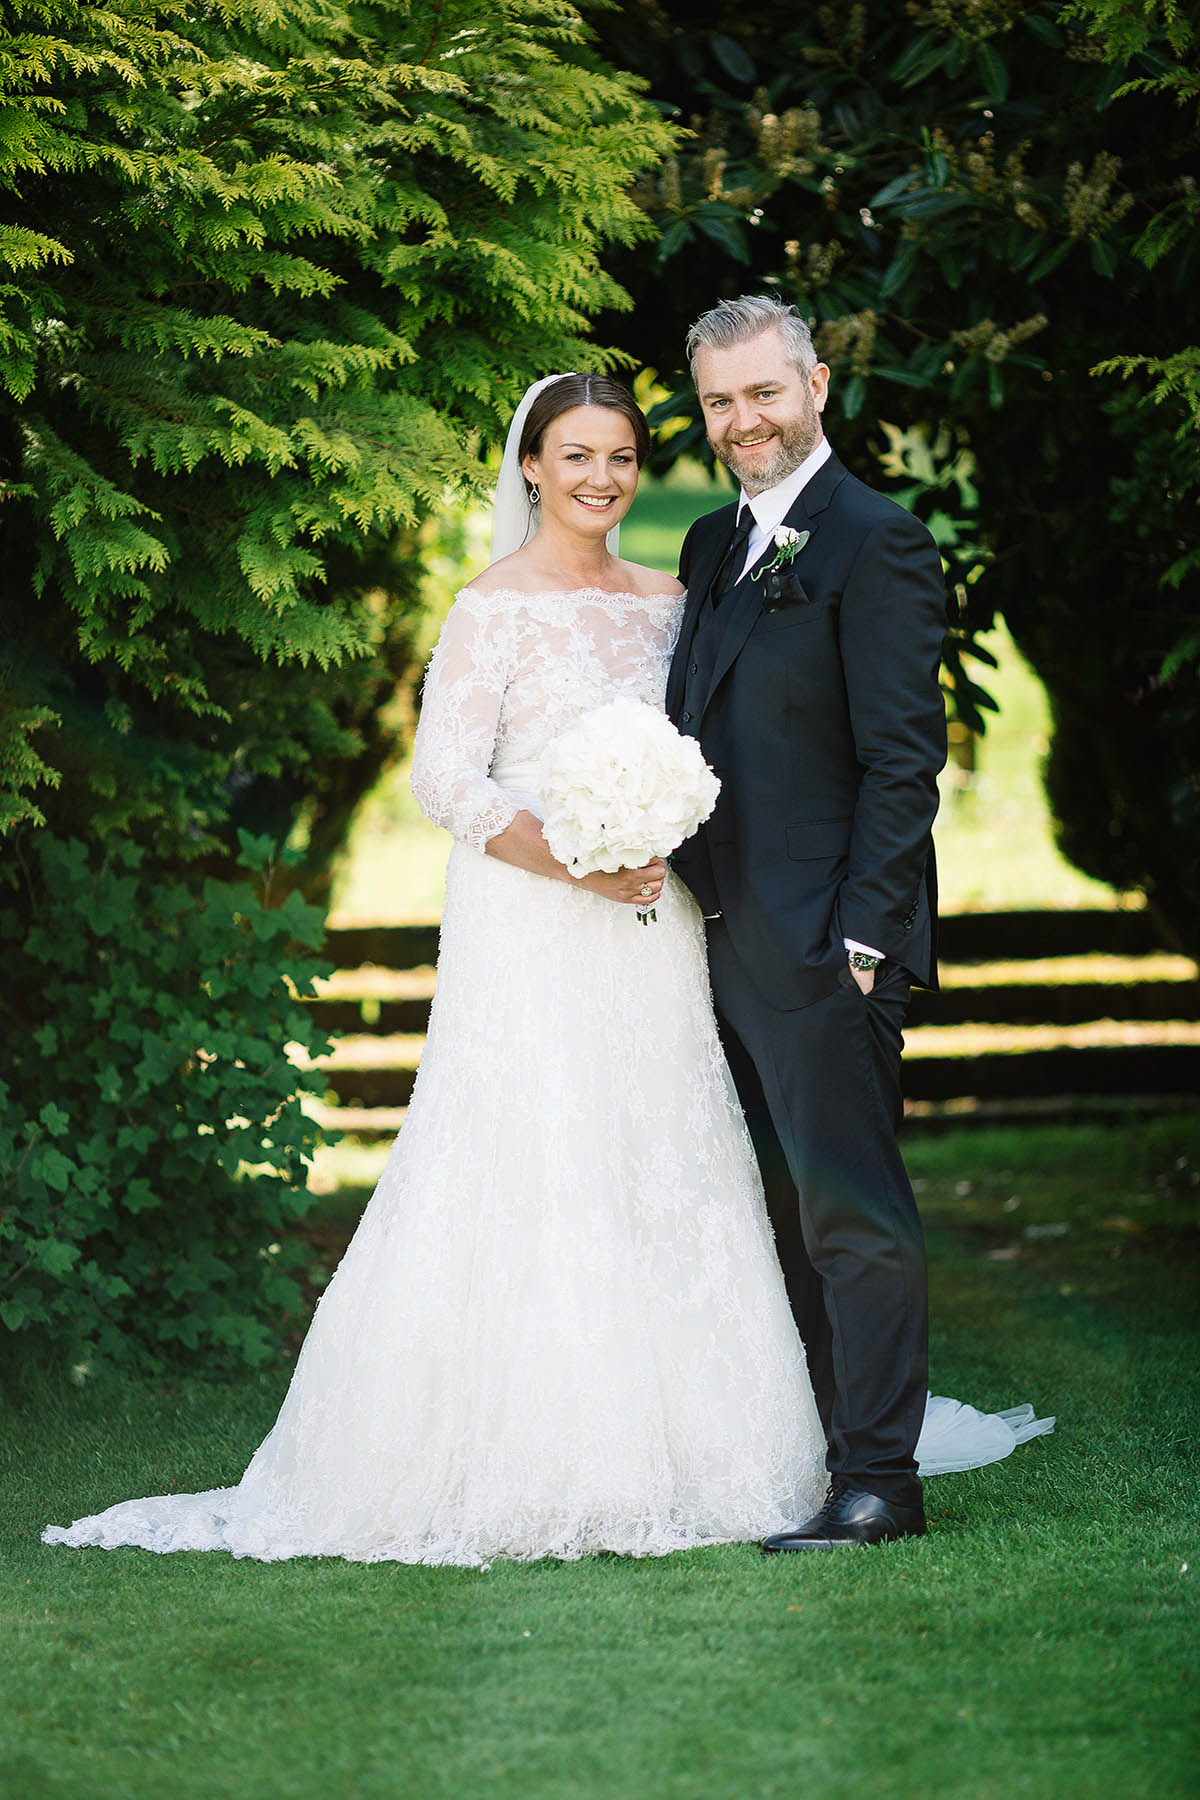 Marisa wore an Elie Saab gown for her elegant wedding at Lartington Hall. Captured by Paul Joseph Photography.